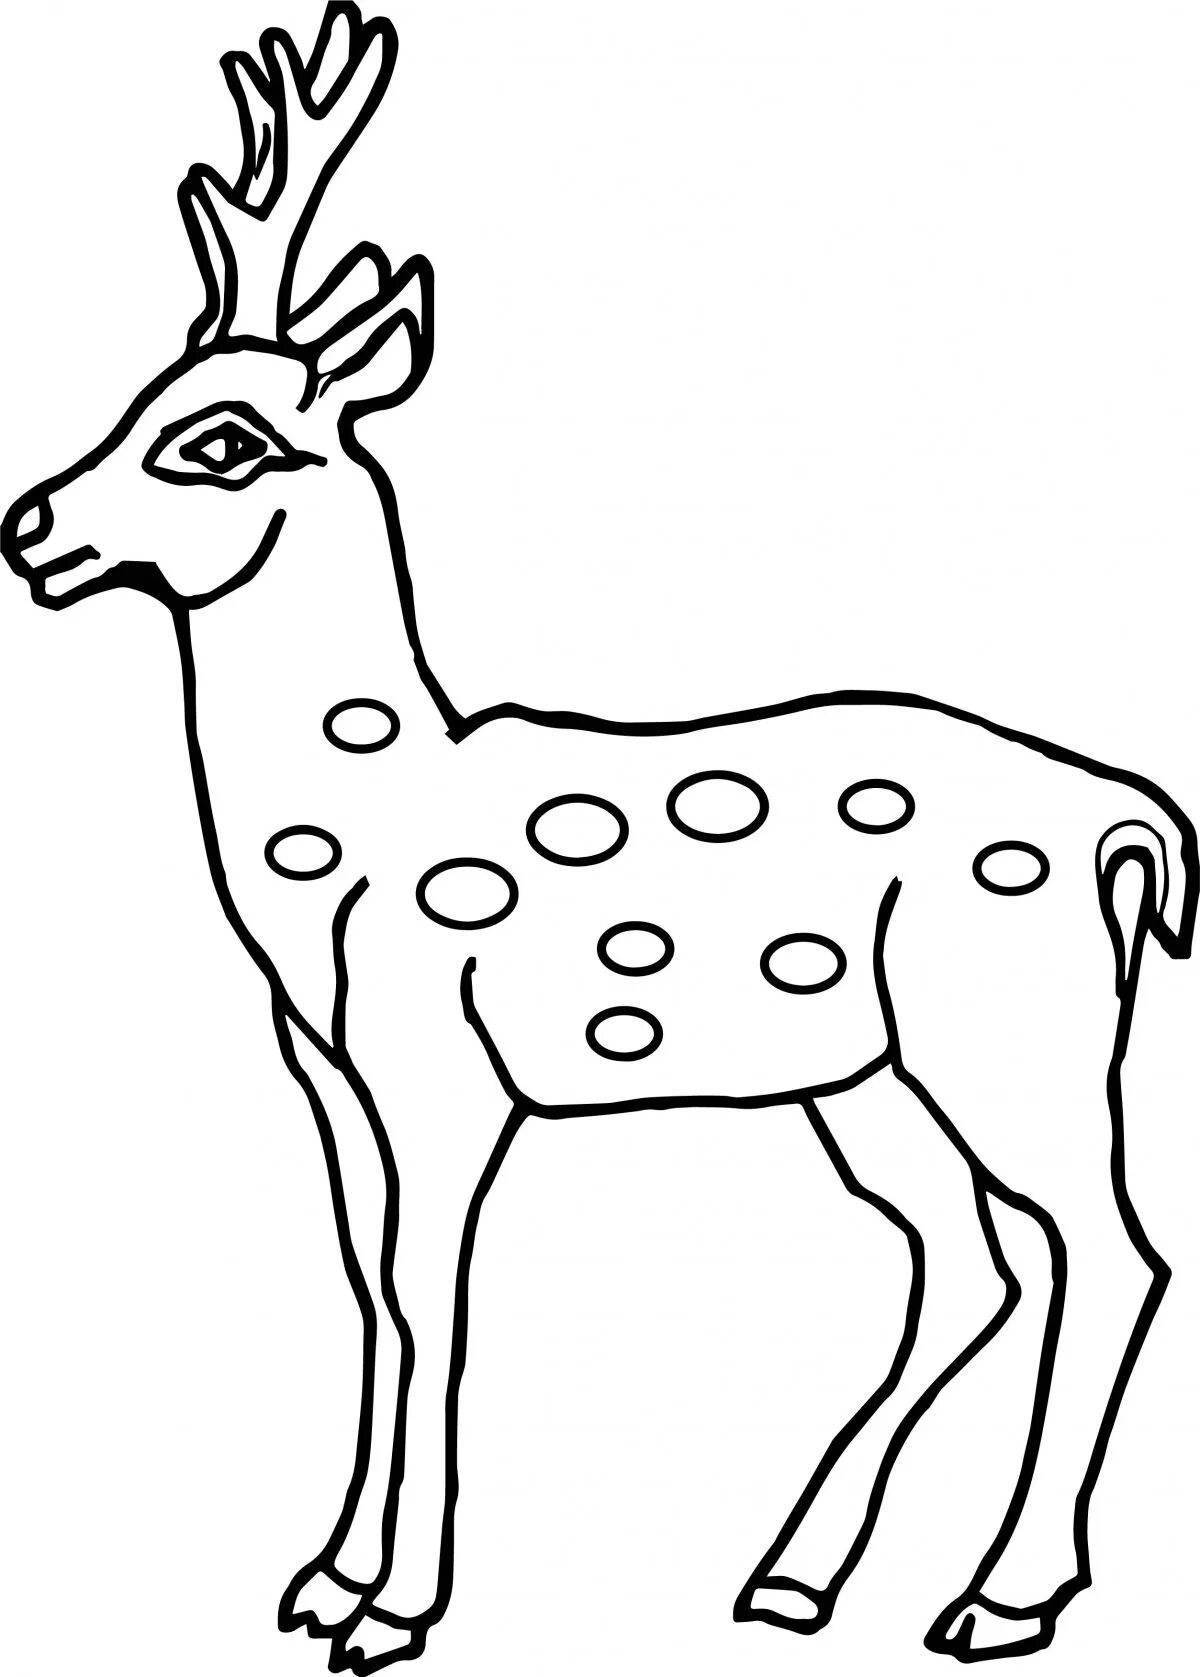 Animated roe deer coloring page for toddlers